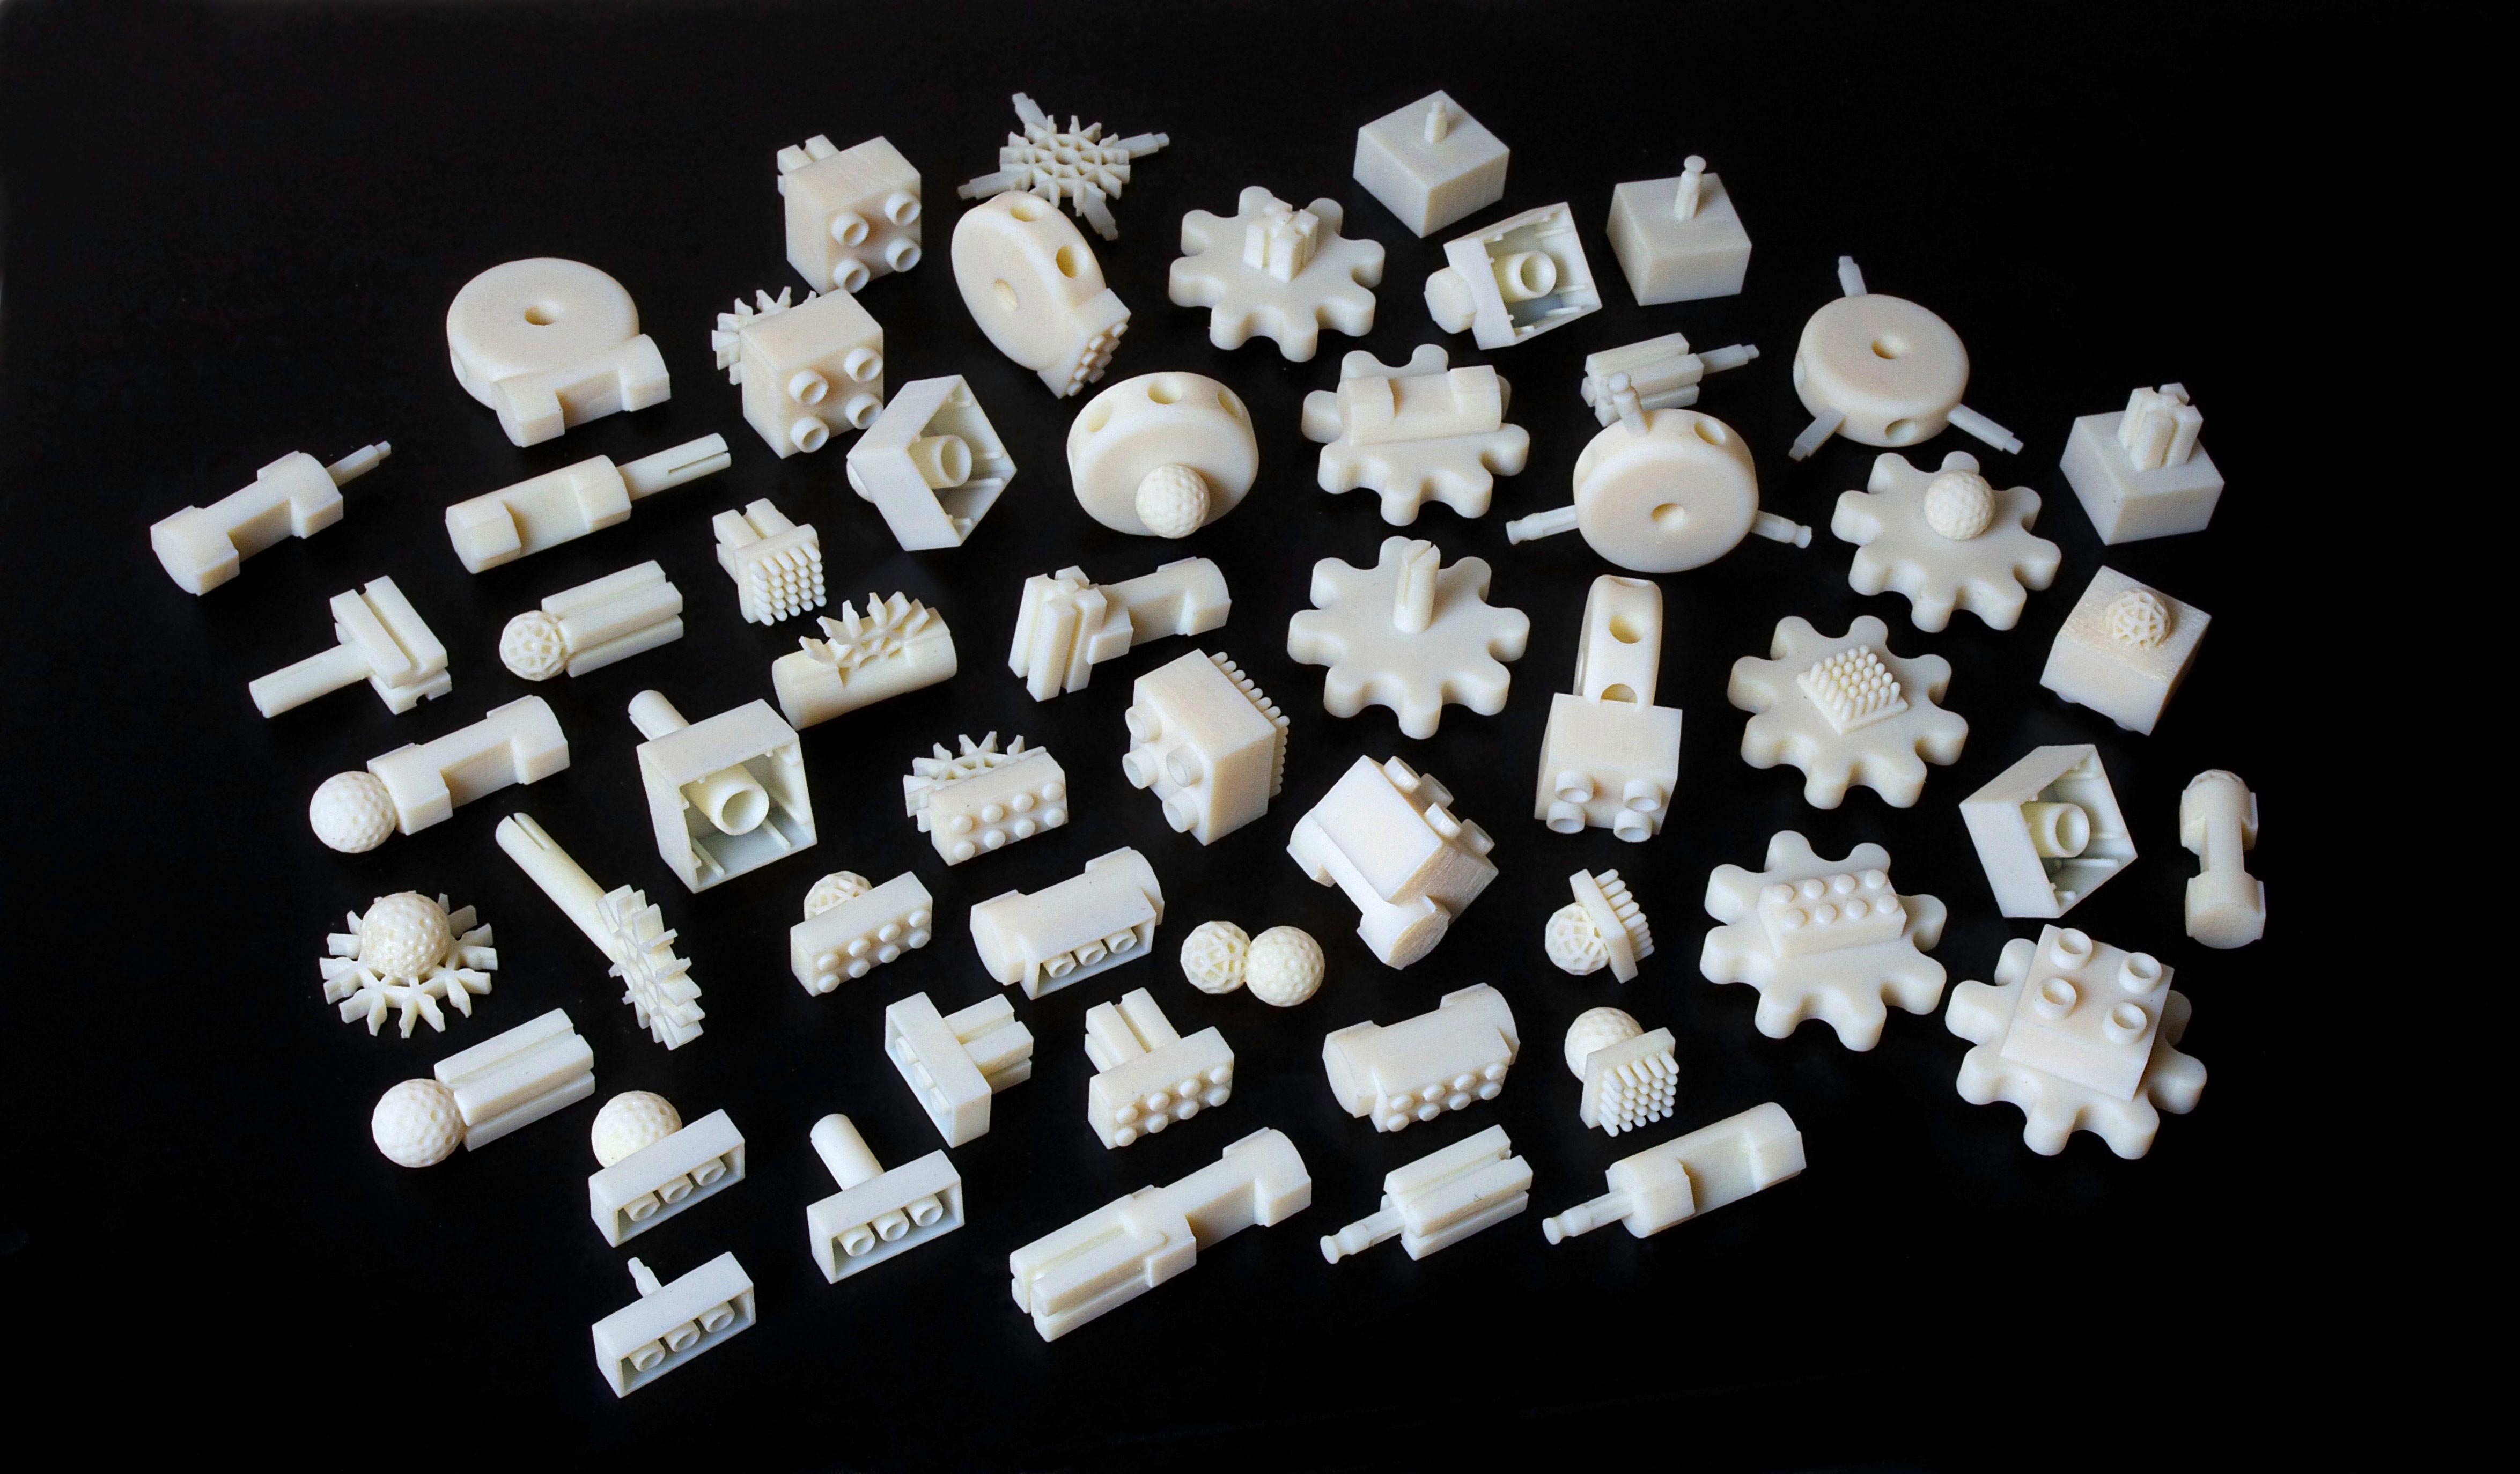 Free Universal Construction Kit Connects All Kinds of Modular Construction  Toys - 99% Invisible